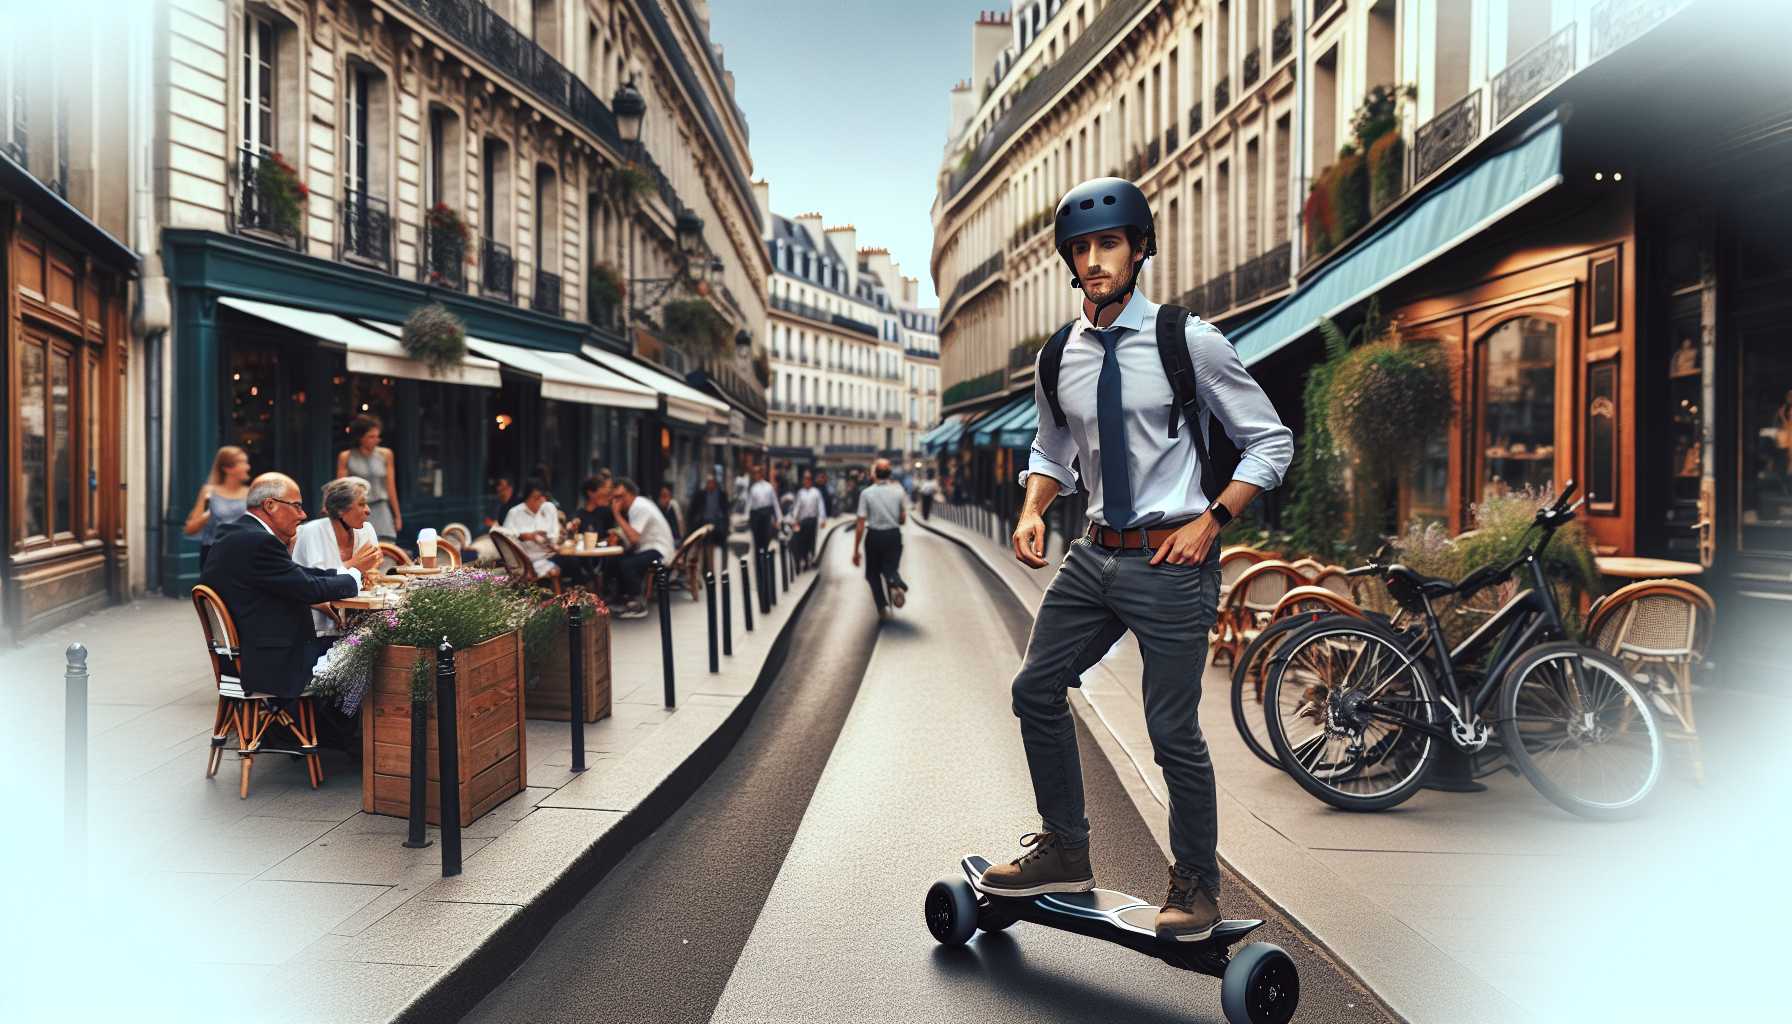 Electric skateboard used for commuting in France